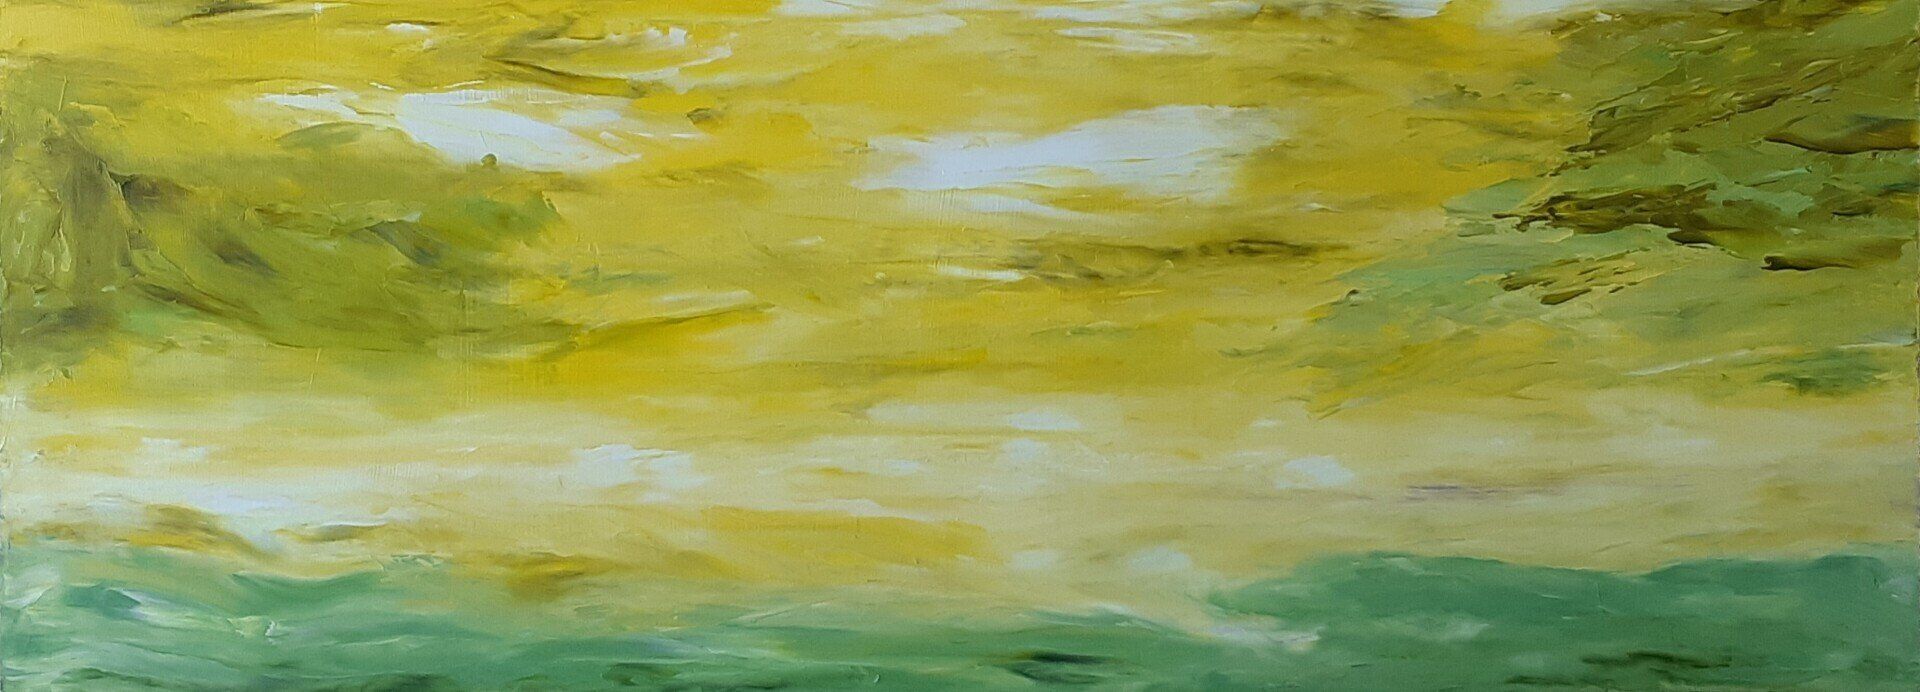 Cantata 6 is an oil on masonite 20 in. x 9 in. With a blend of Green Gold, yellow, and SAP green this painting brings you and all the elements of a landscape to the edge of the horison where the beyond is at your reach.